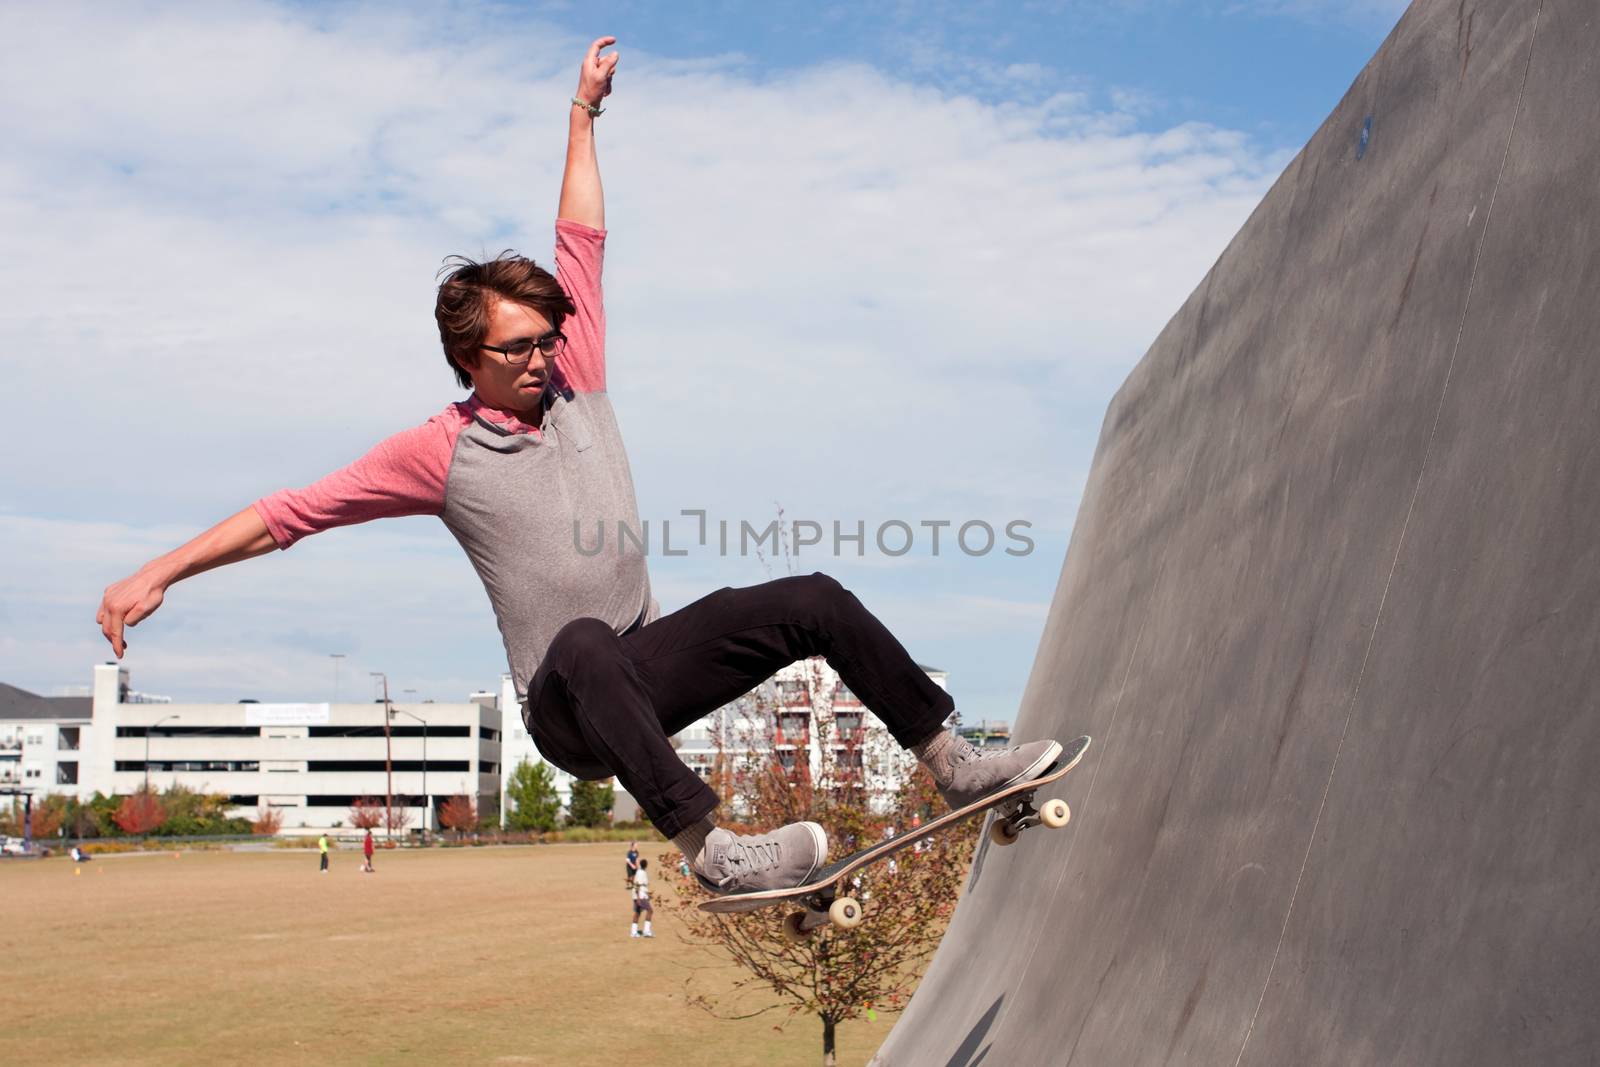 Atlanta, GA, USA - November 2, 2013:  A young adult male catches air while practicing skateboarding off a ramp at the Old Fourth Ward Skatepark near the Atlanta Beltline.